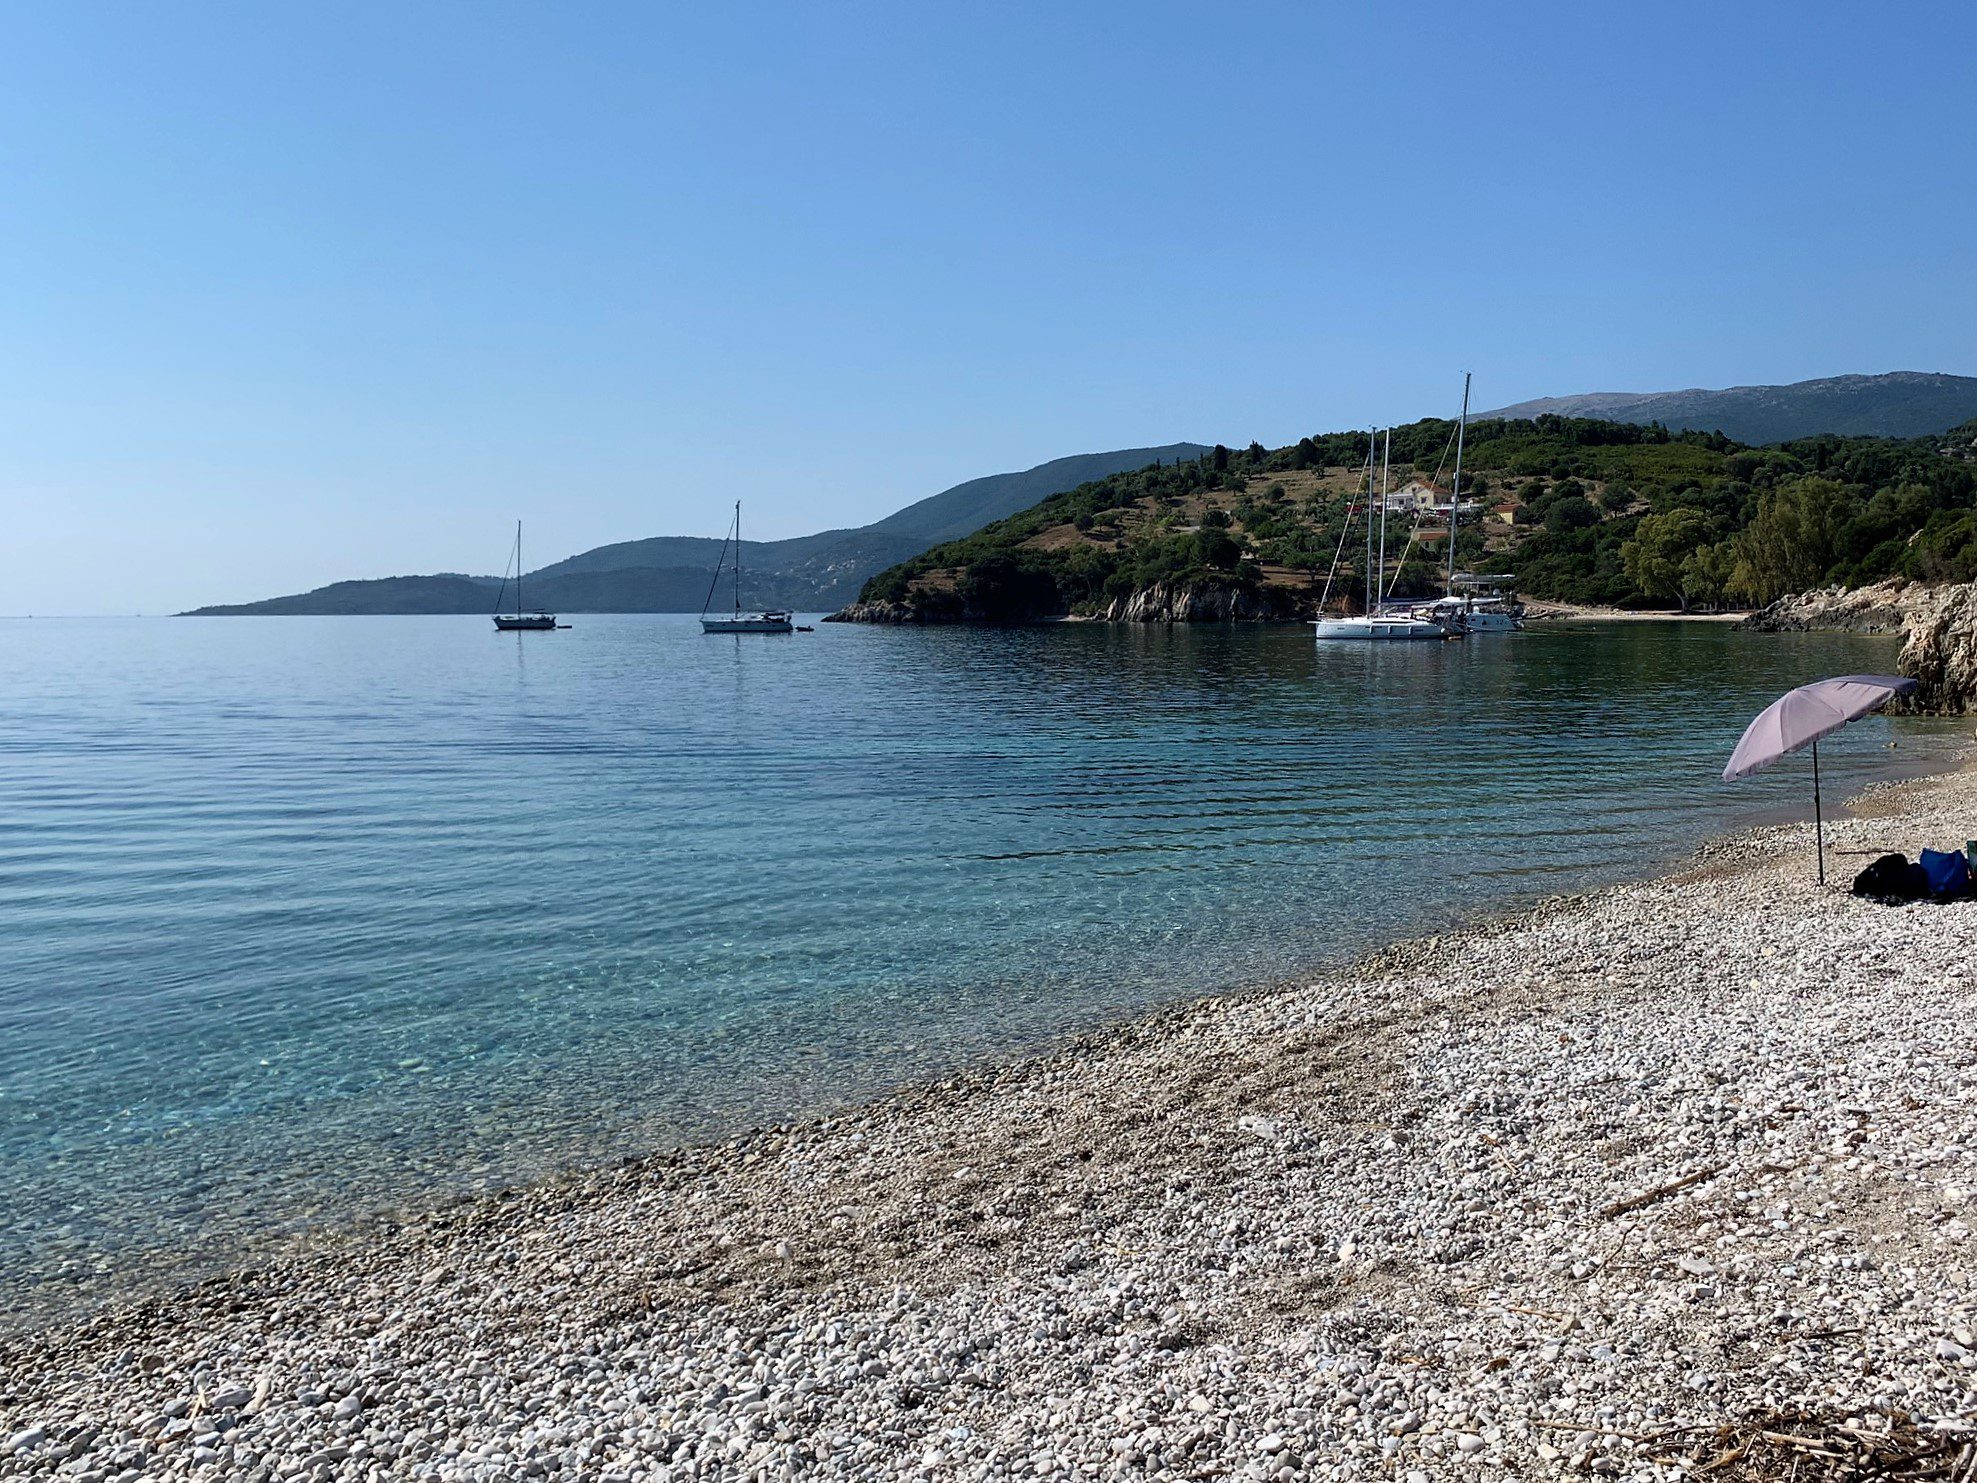 Landscape and terrain of land for sale on Ithaca Greece in Marmakas